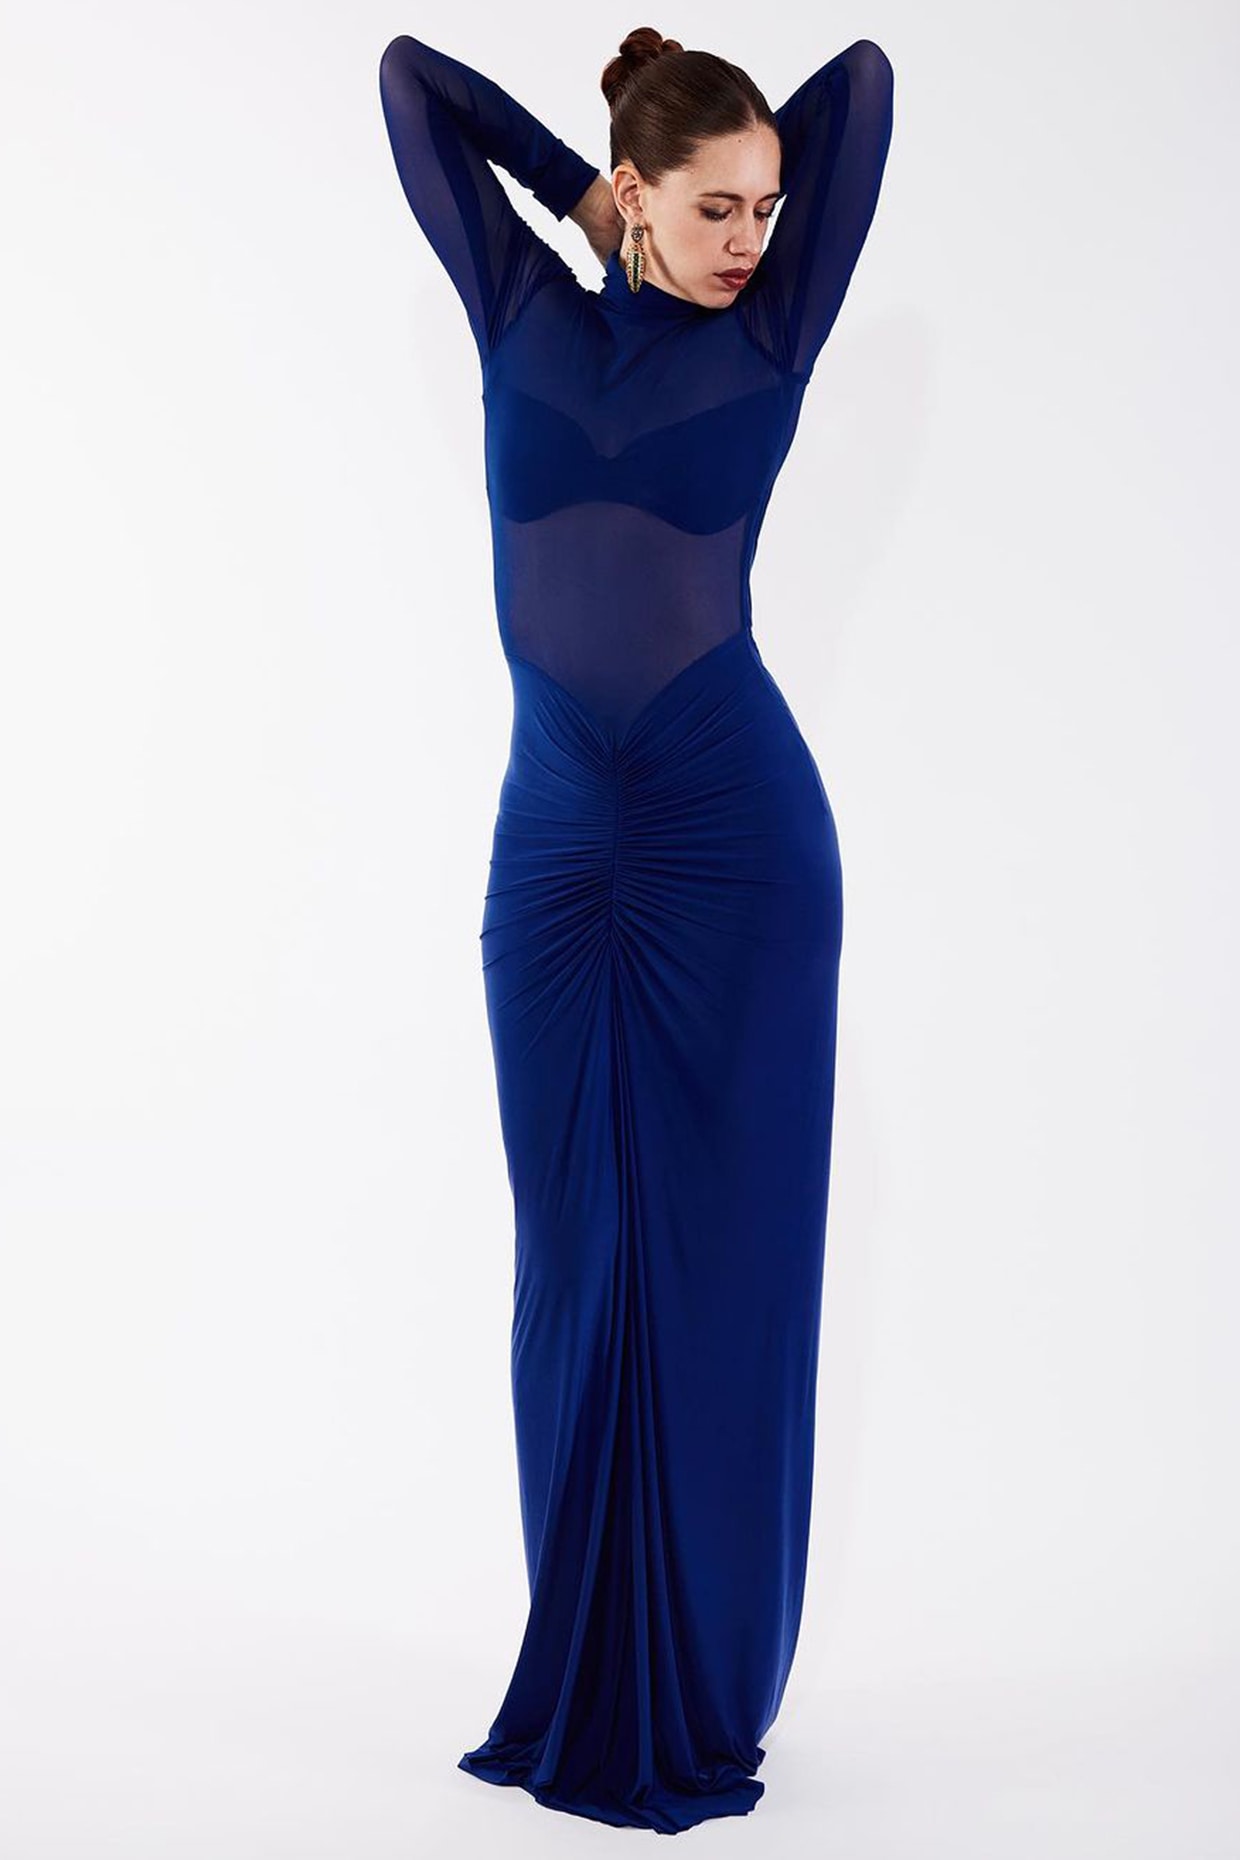 Navy Blue Arabic Sheath Midnight Blue Cocktail Dress Elegant Knee Length  Formal Club Wear For Evening Prom Party Customizable Plus Size Gown 201113  From Lu006, $91.74 | DHgate.Com